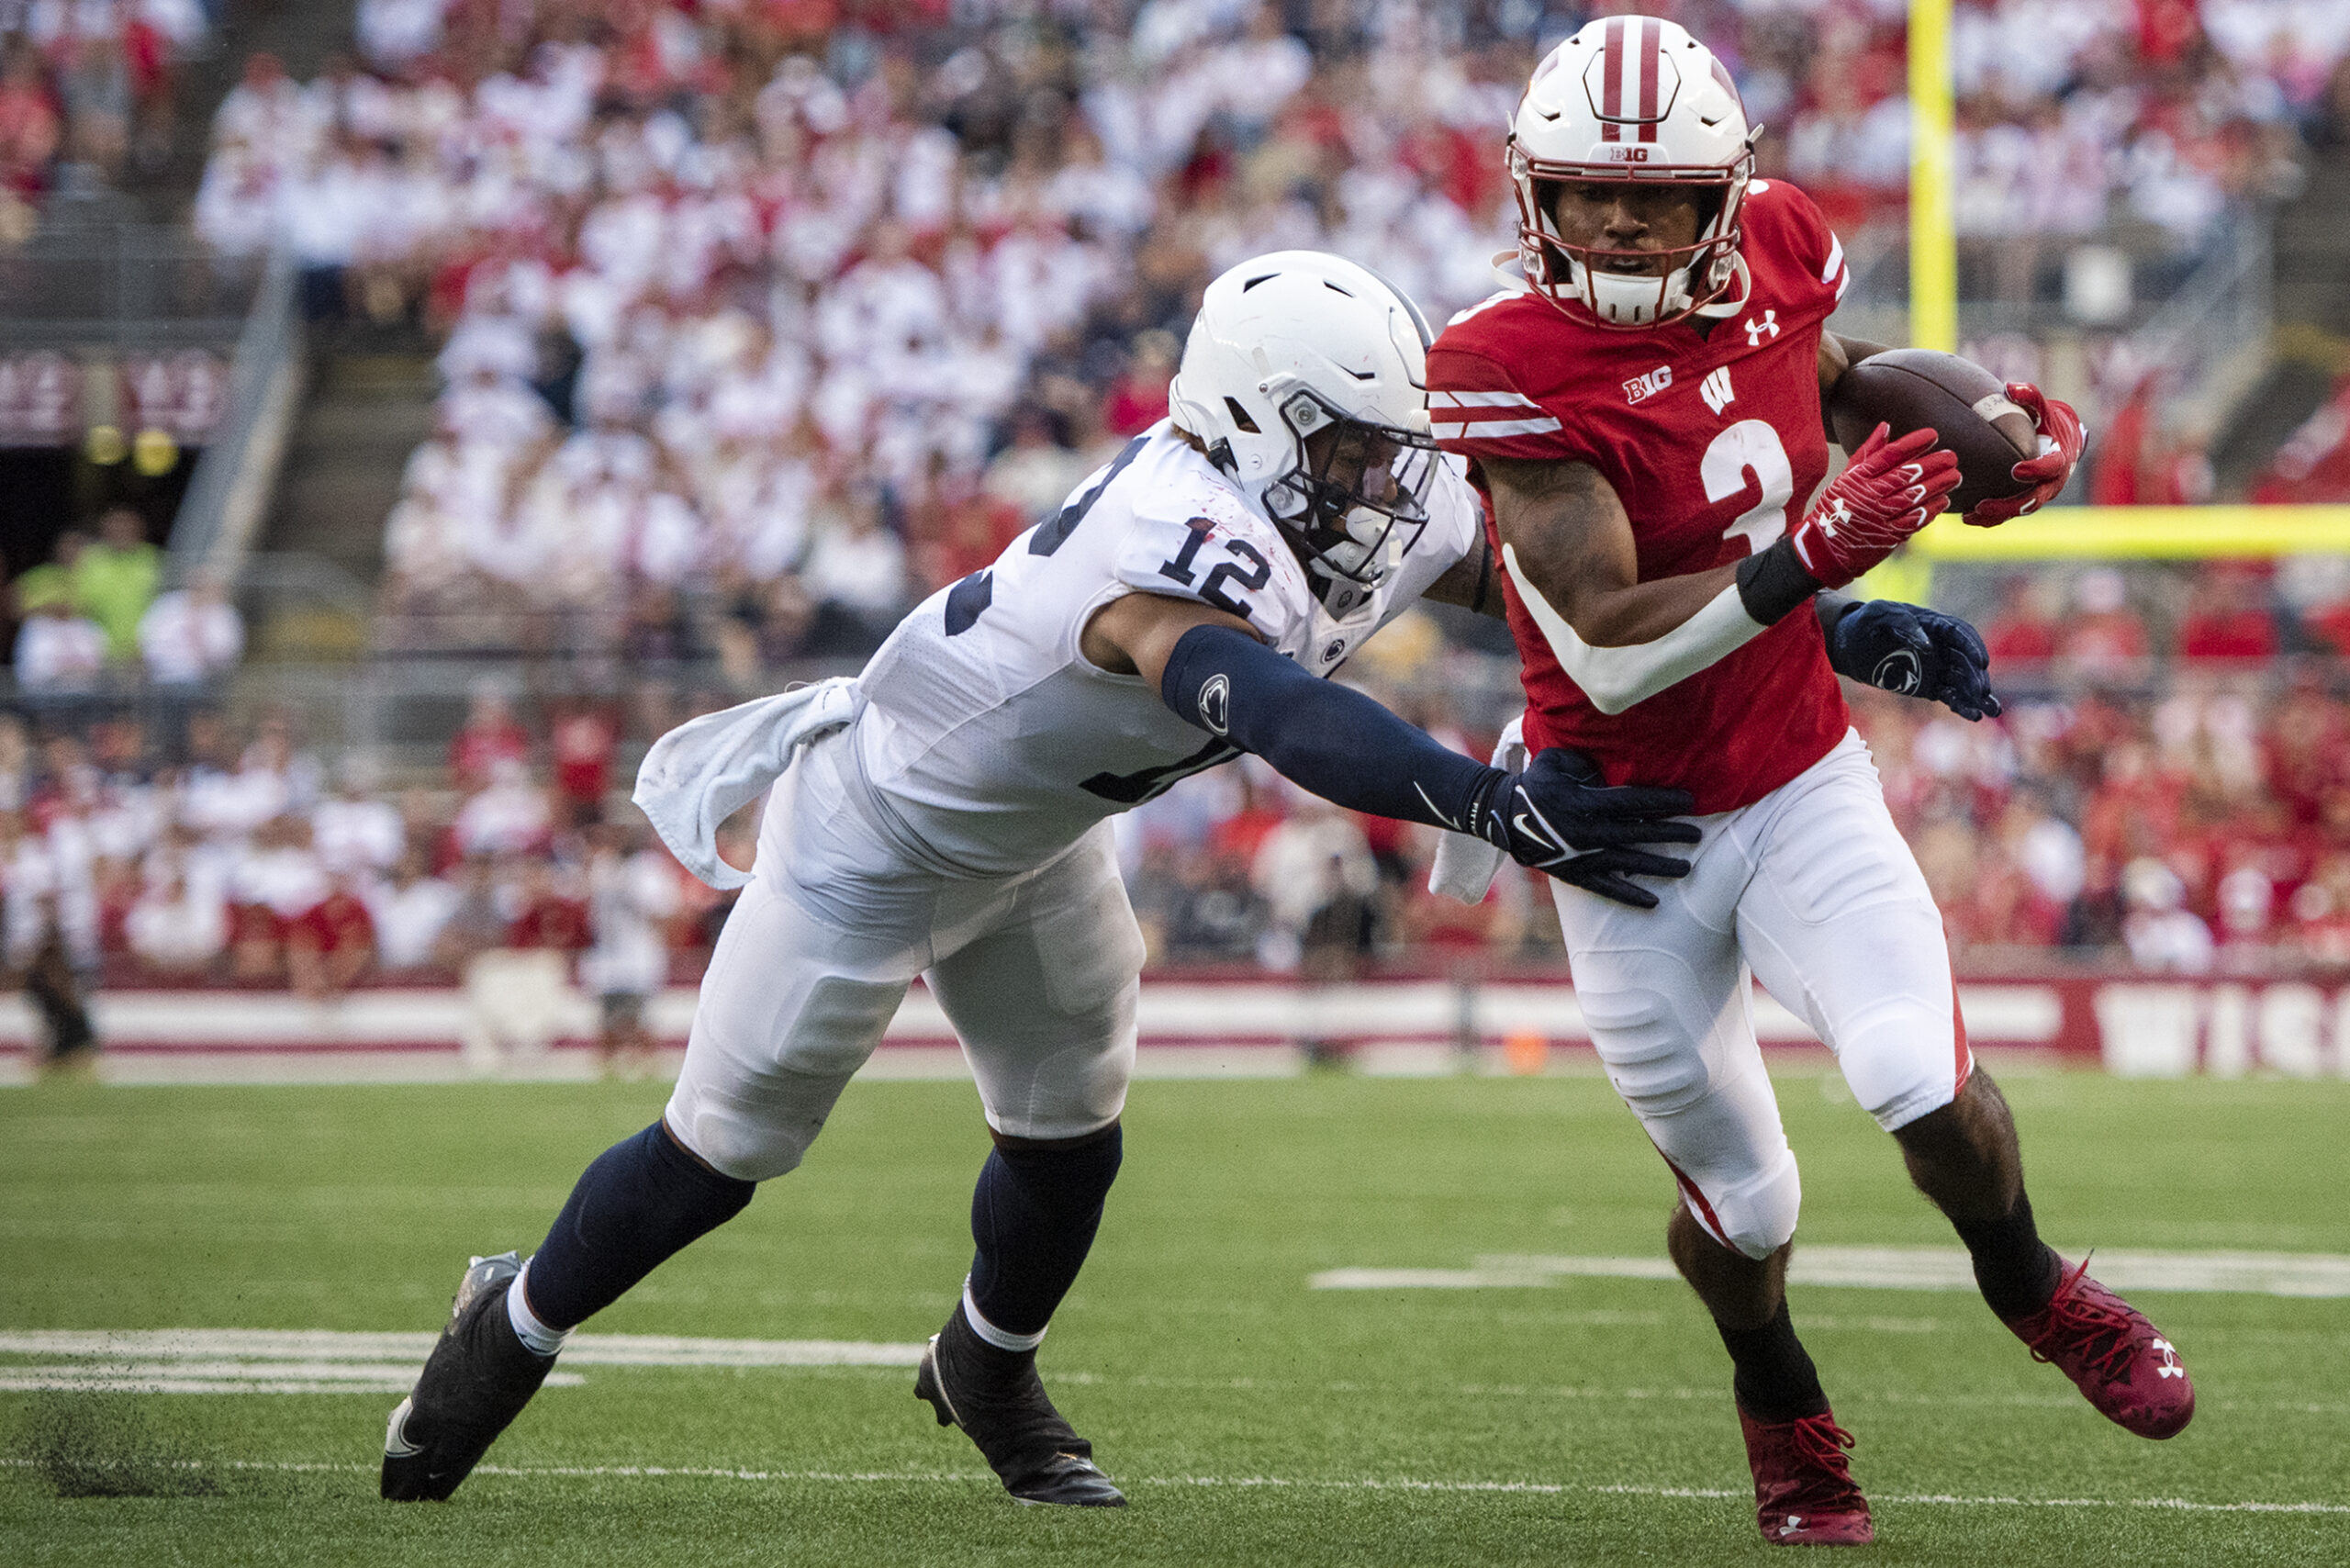 Badgers topple ranked opponents in football, volleyball, women’s hockey